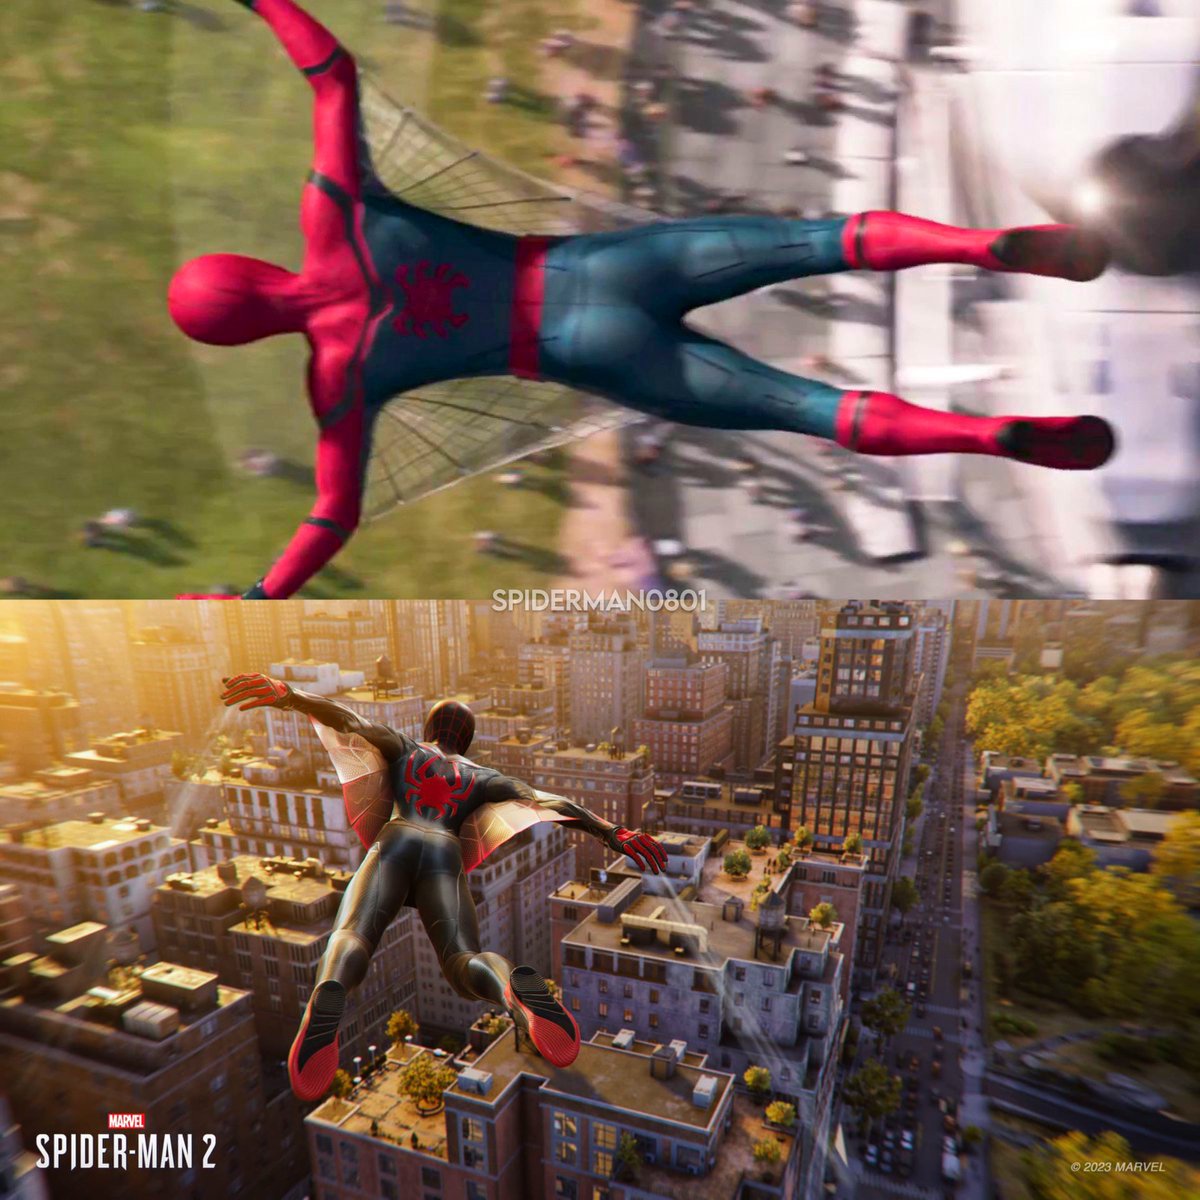 How it started Vs how it’s going

#SpiderManHomecoming 
#MarvelsSpiderMan2